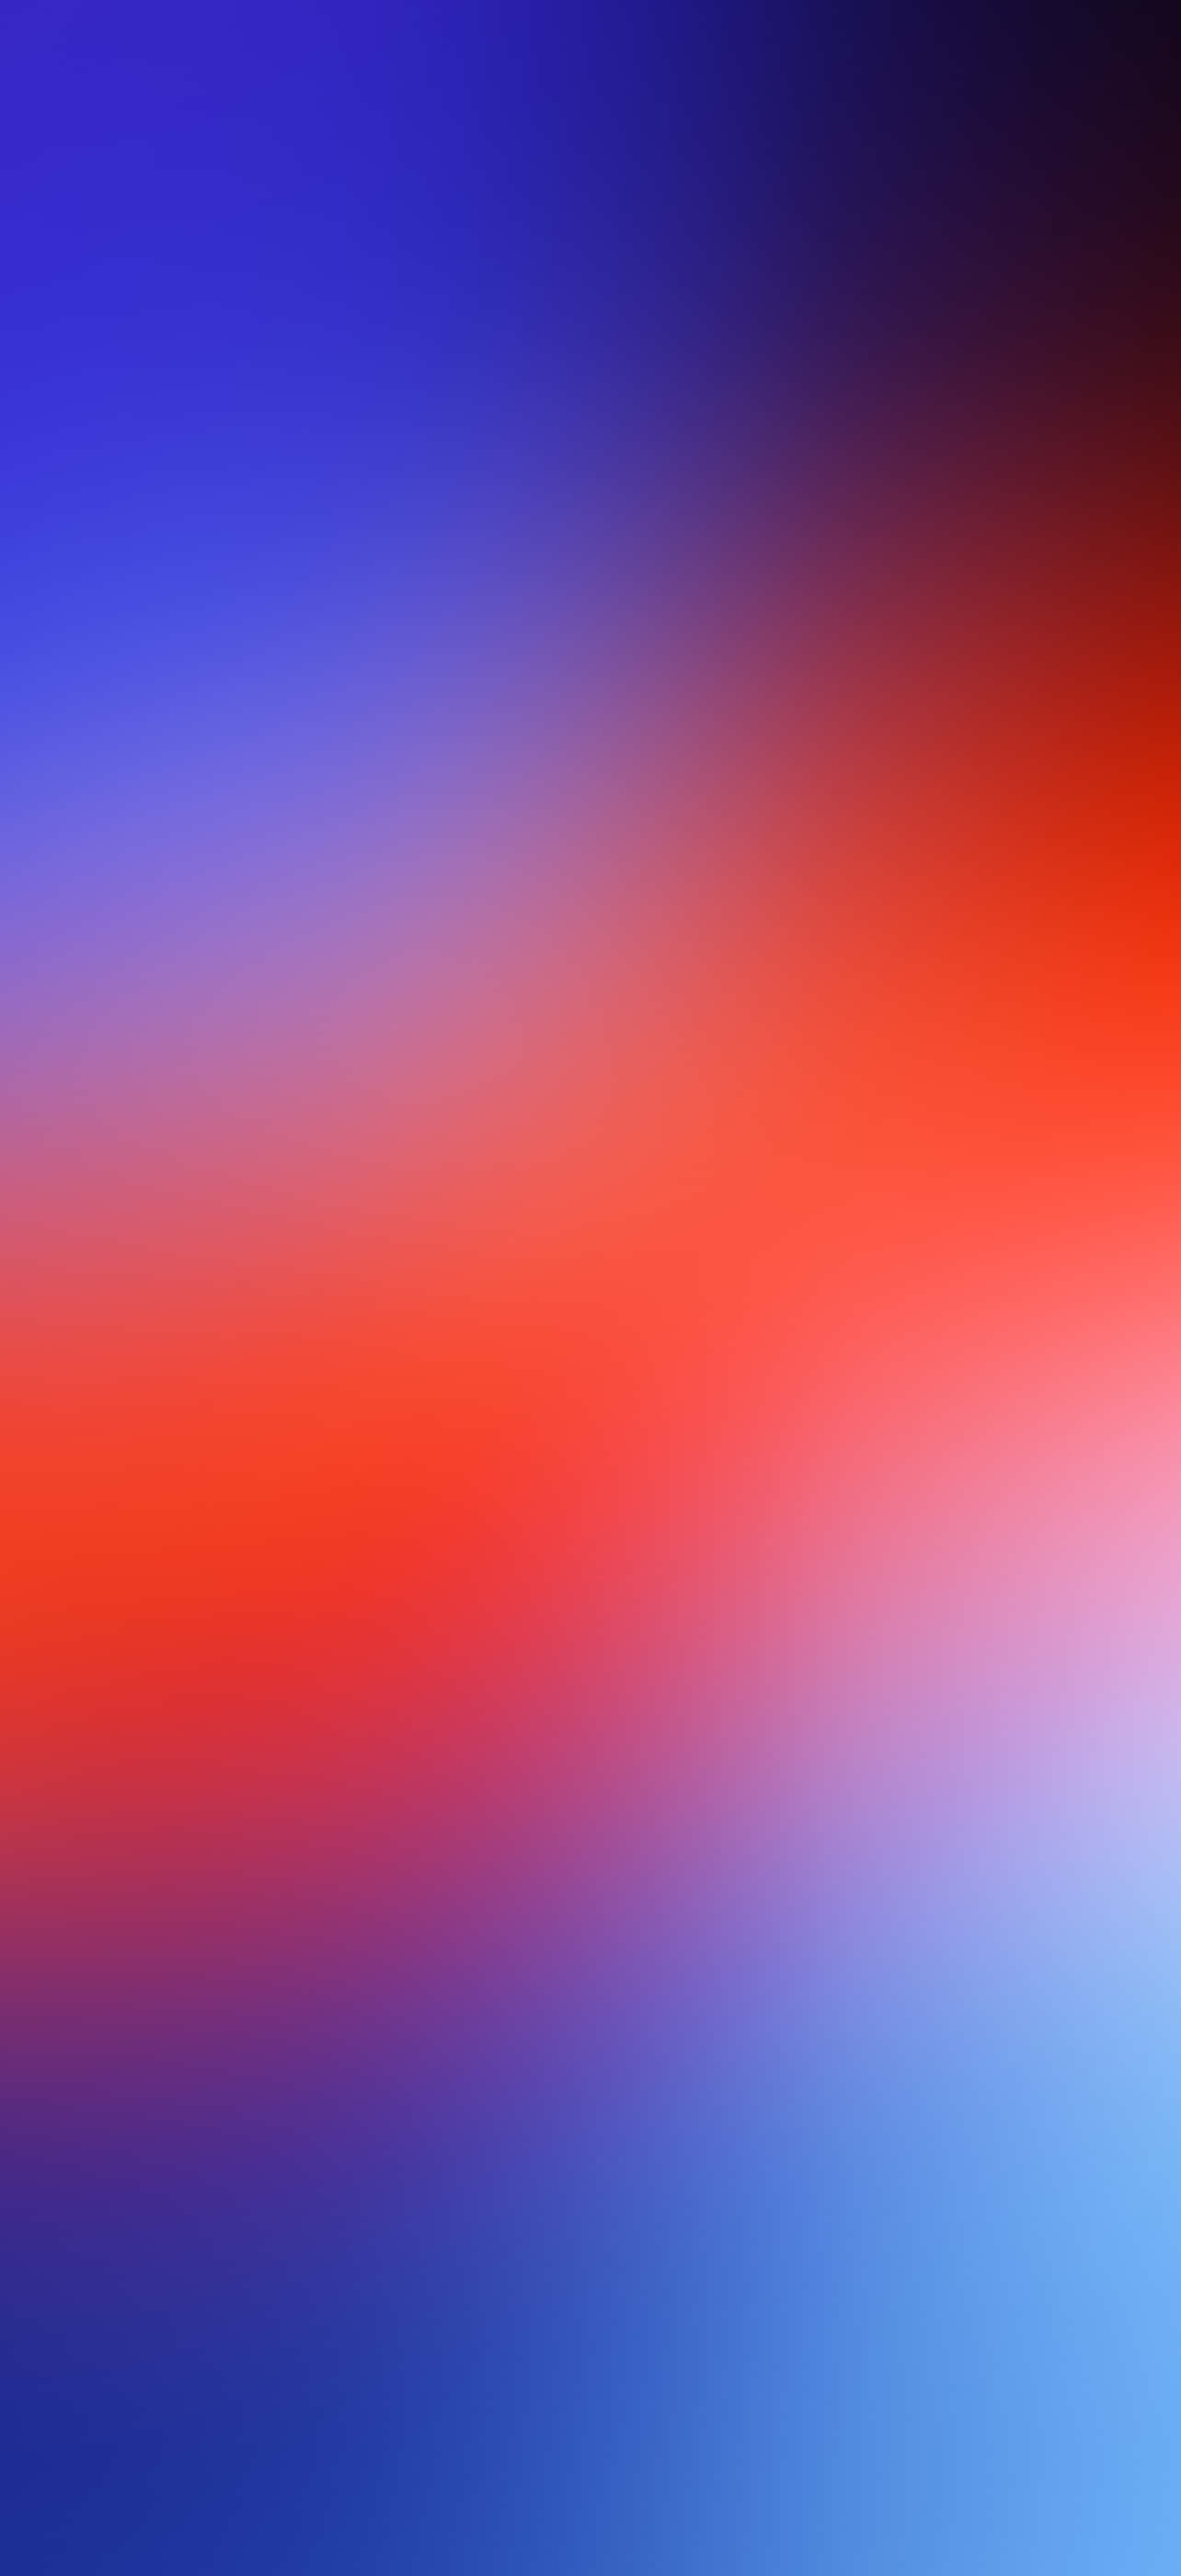 Download Red And Blue Iphone Wallpaper | Wallpapers.com